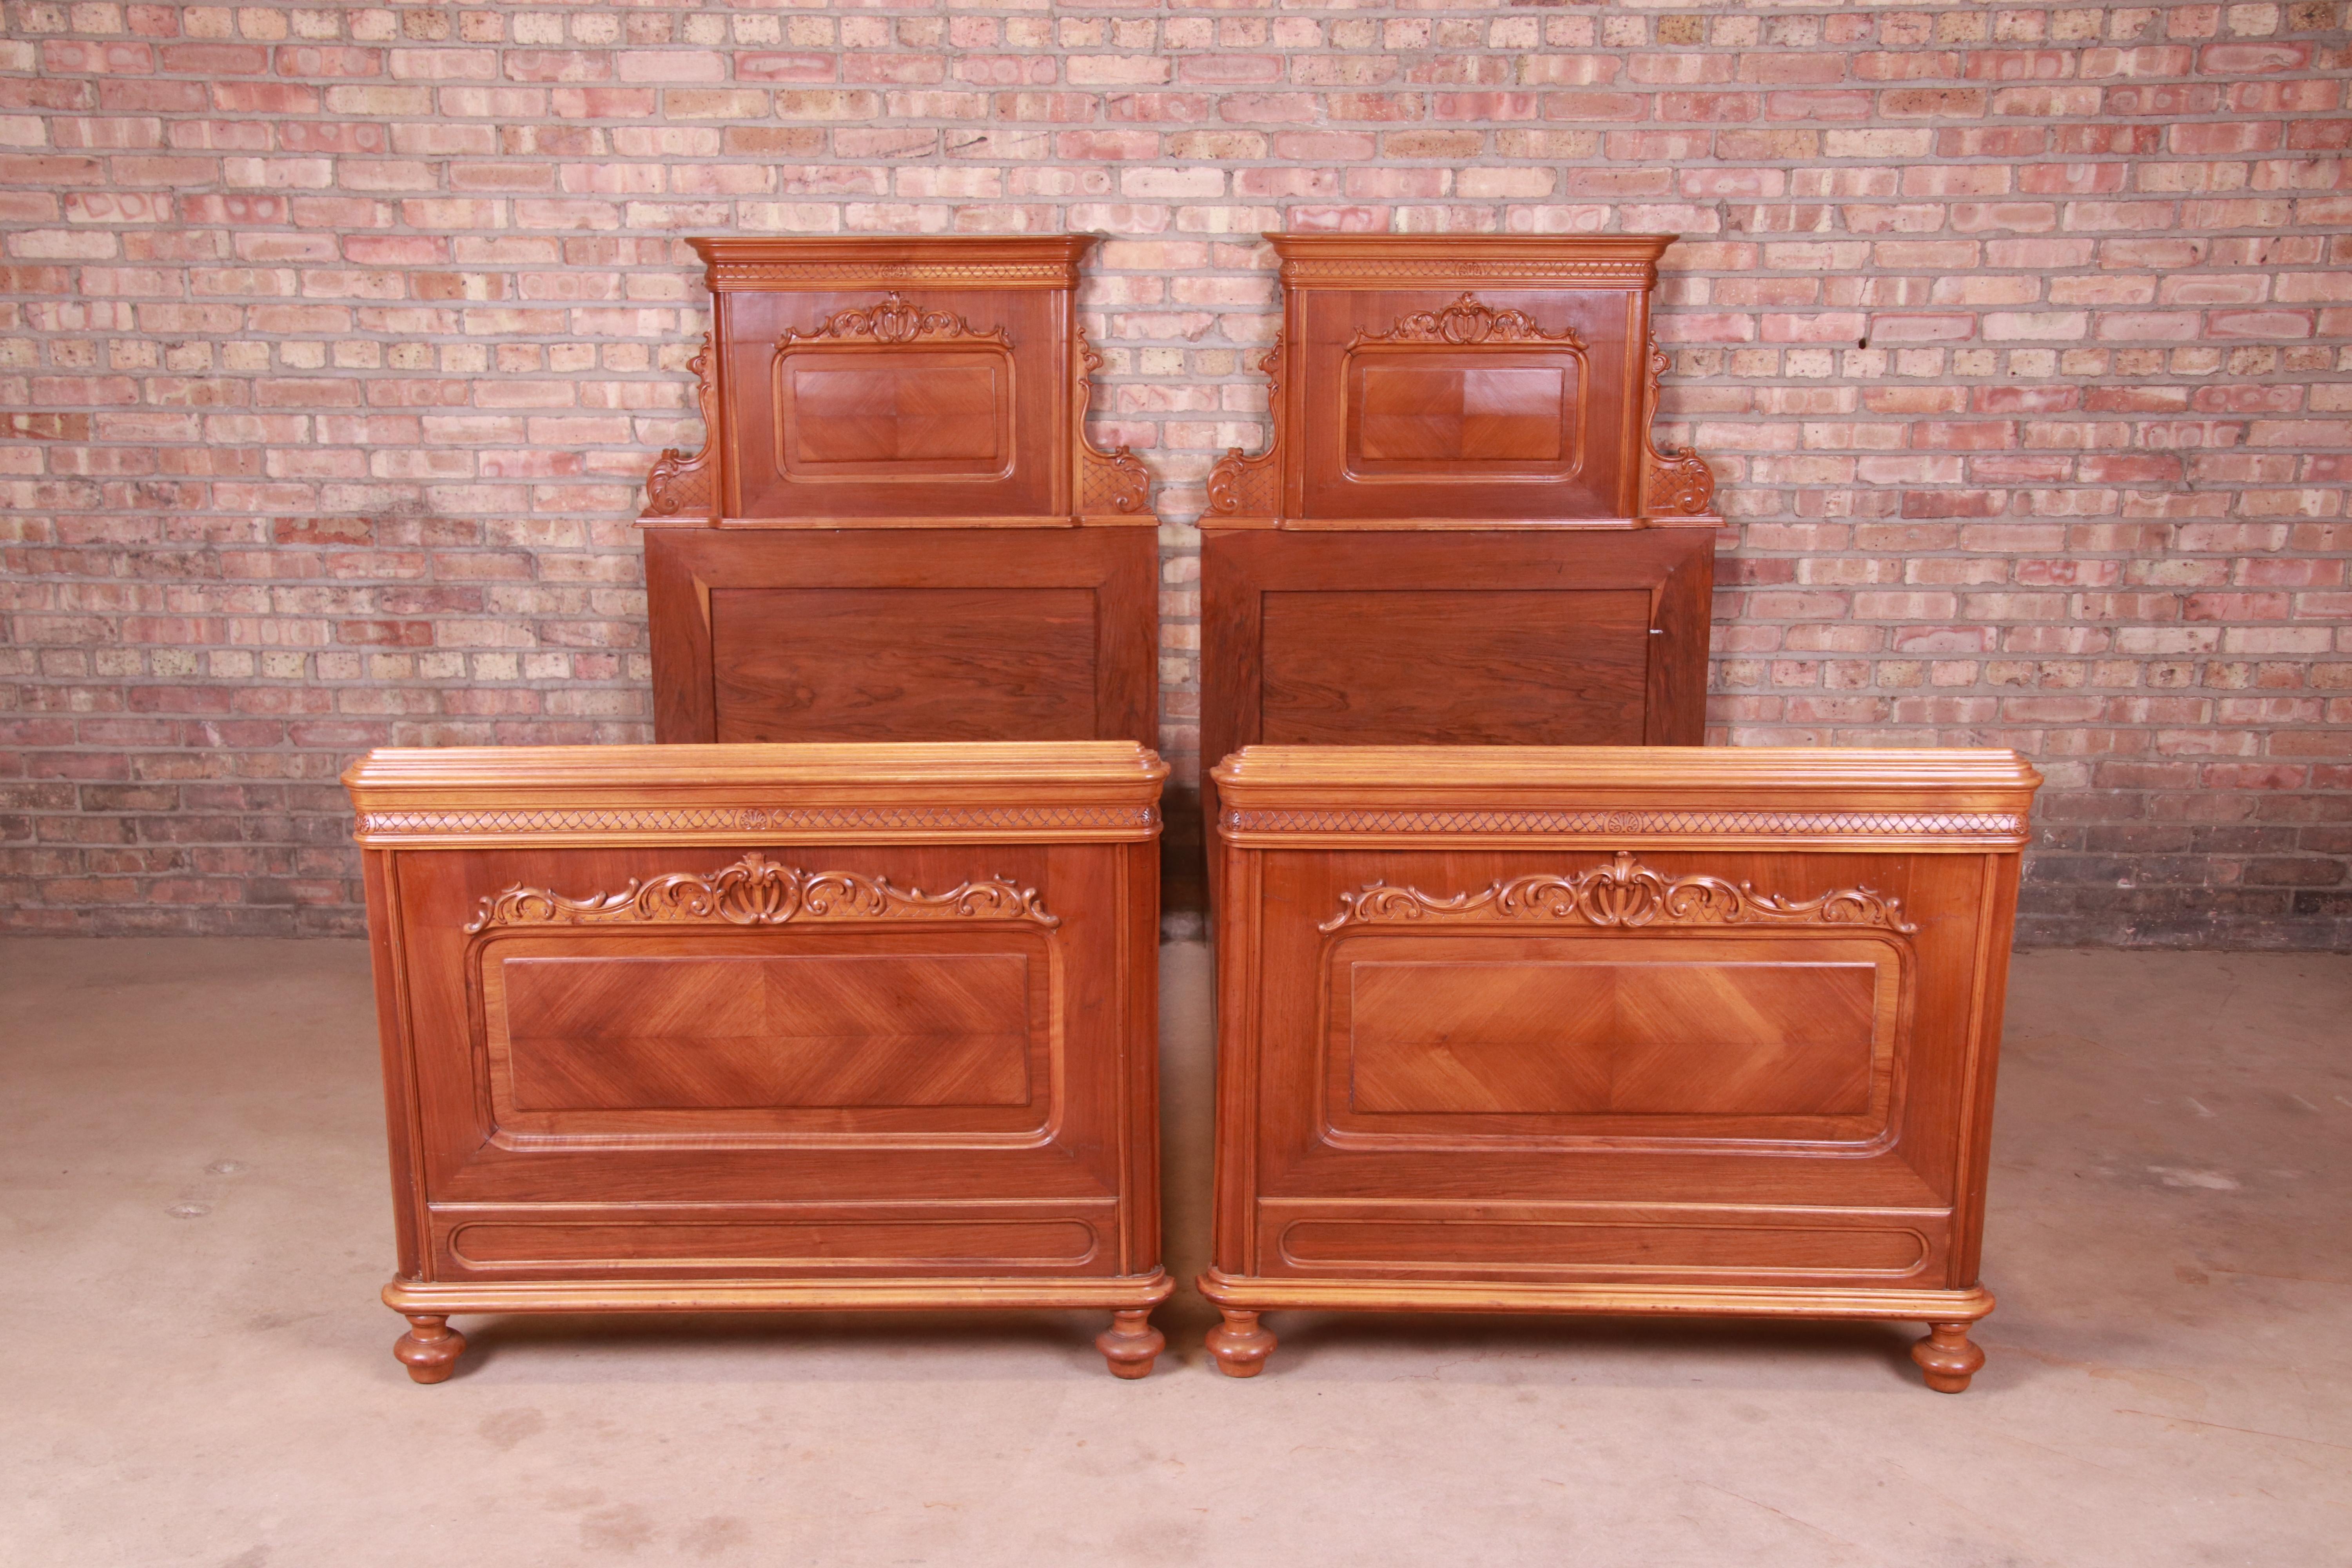 A gorgeous pair of antique Victorian carved mahogany twin beds

Circa 1880s

Measures: 41.5